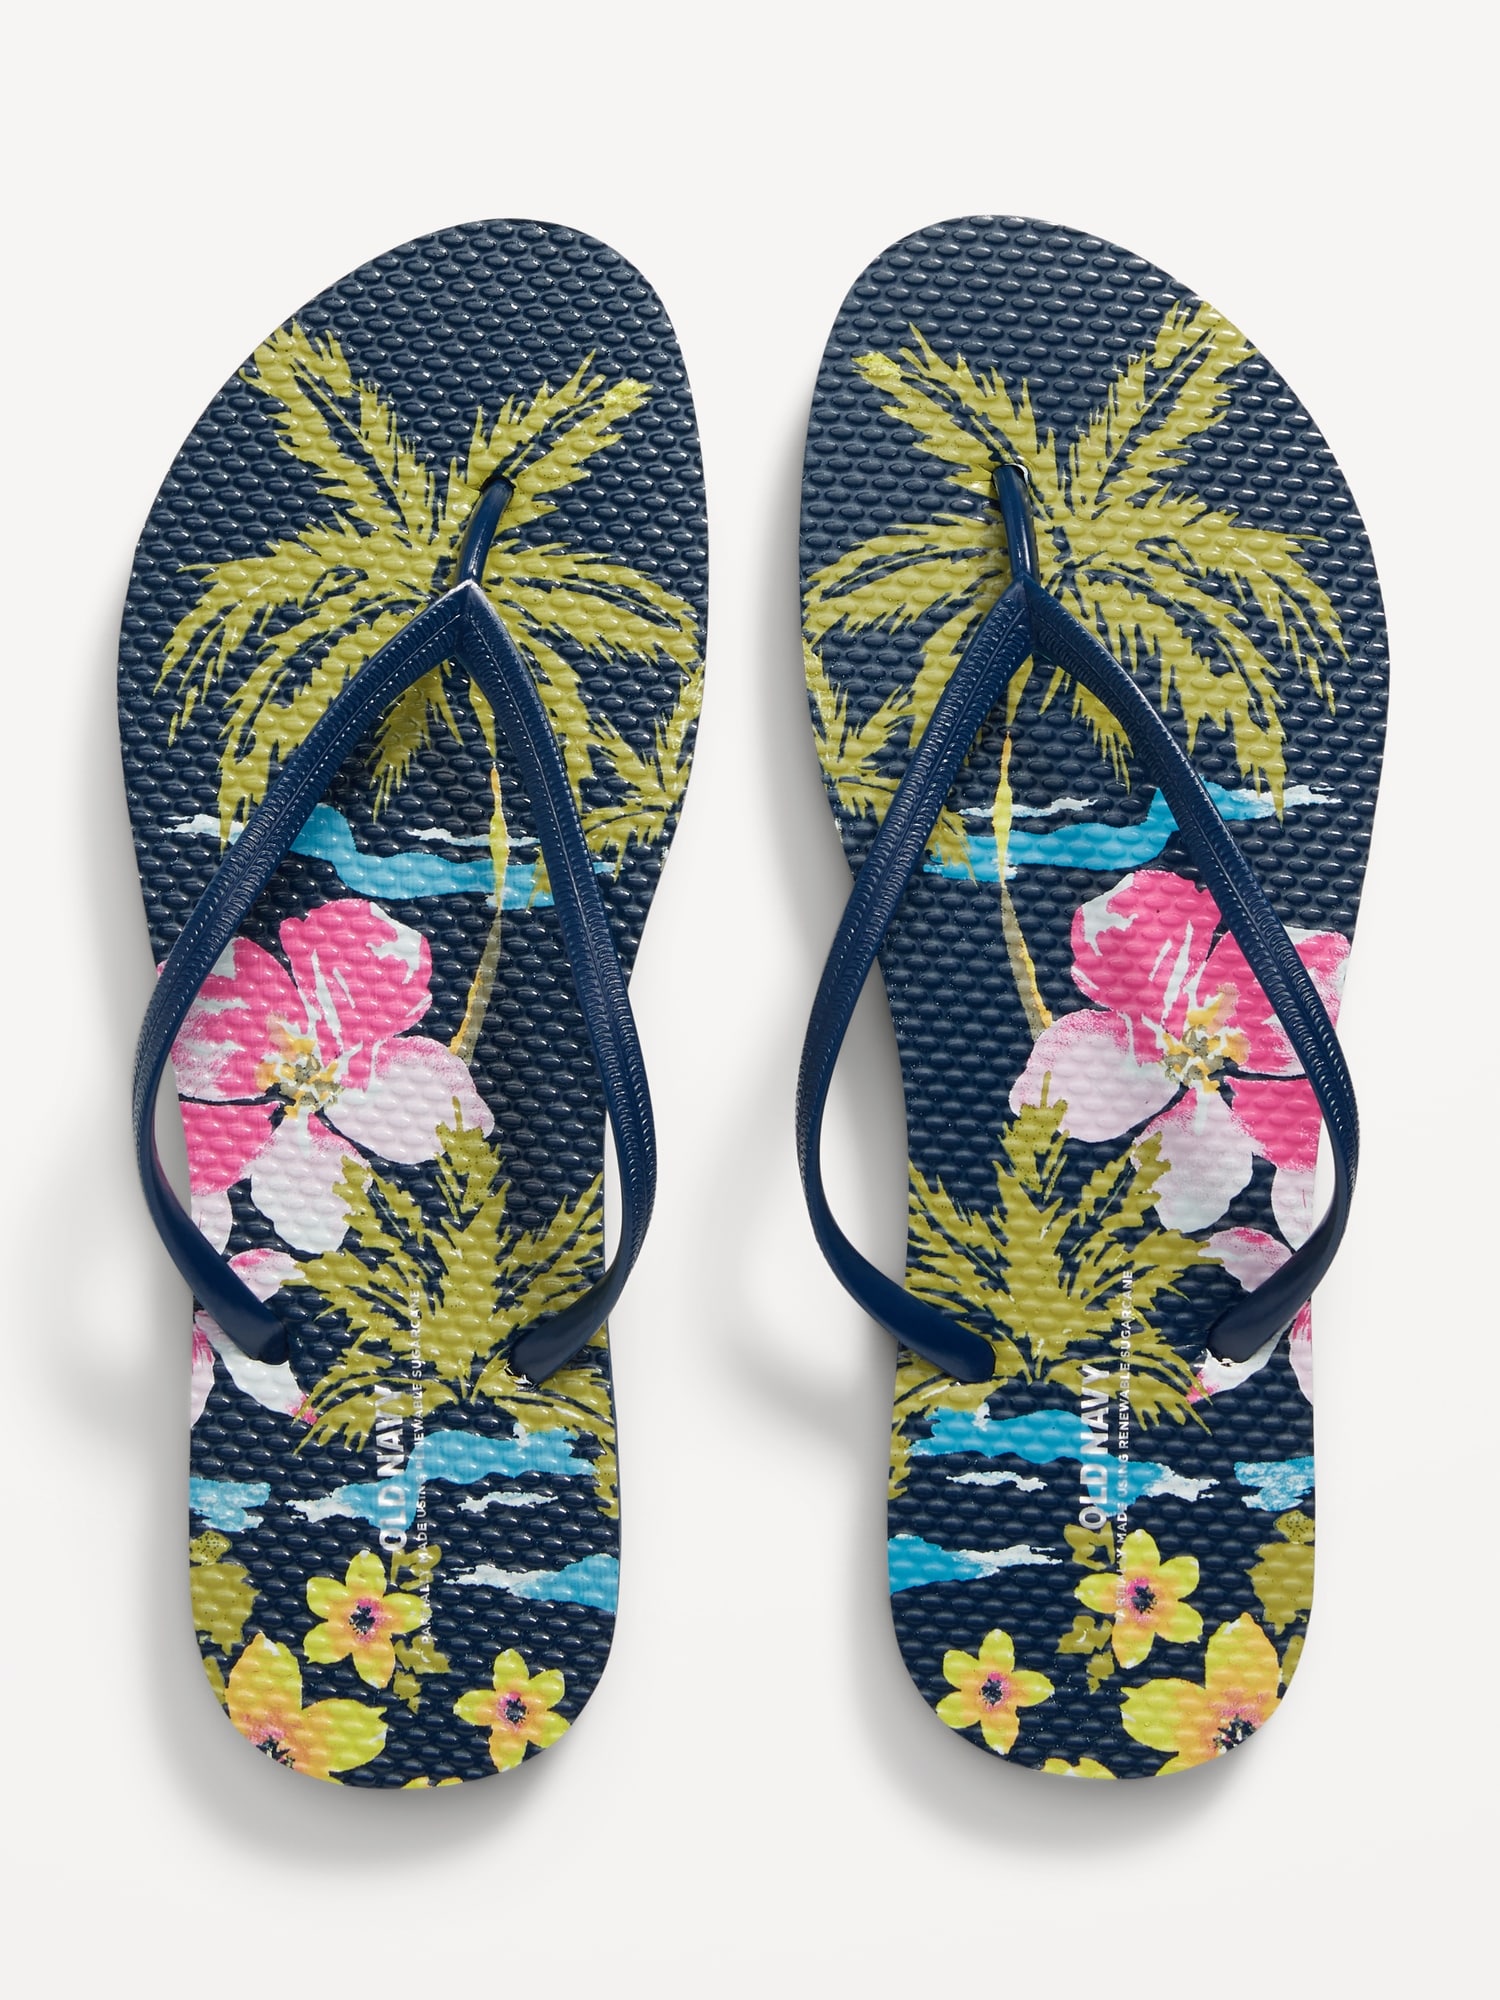 Old Navy Woman Flip Flops Sandals Summer Beach Size 6,7,8,9,10,and 11 Brand  NEW 